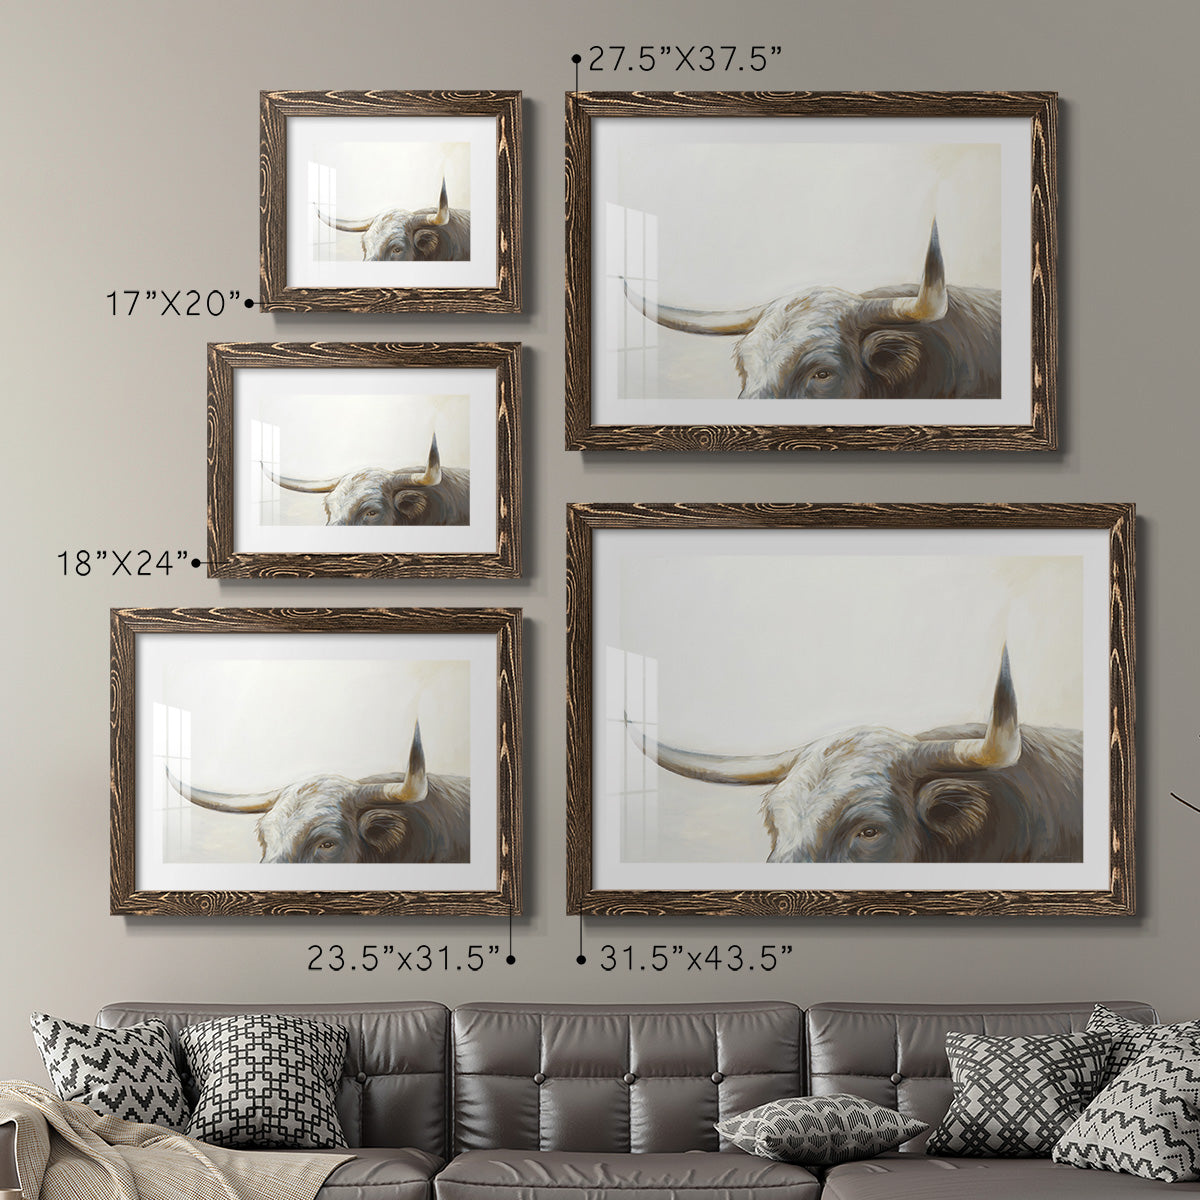 Wild Thing-Premium Framed Print - Ready to Hang